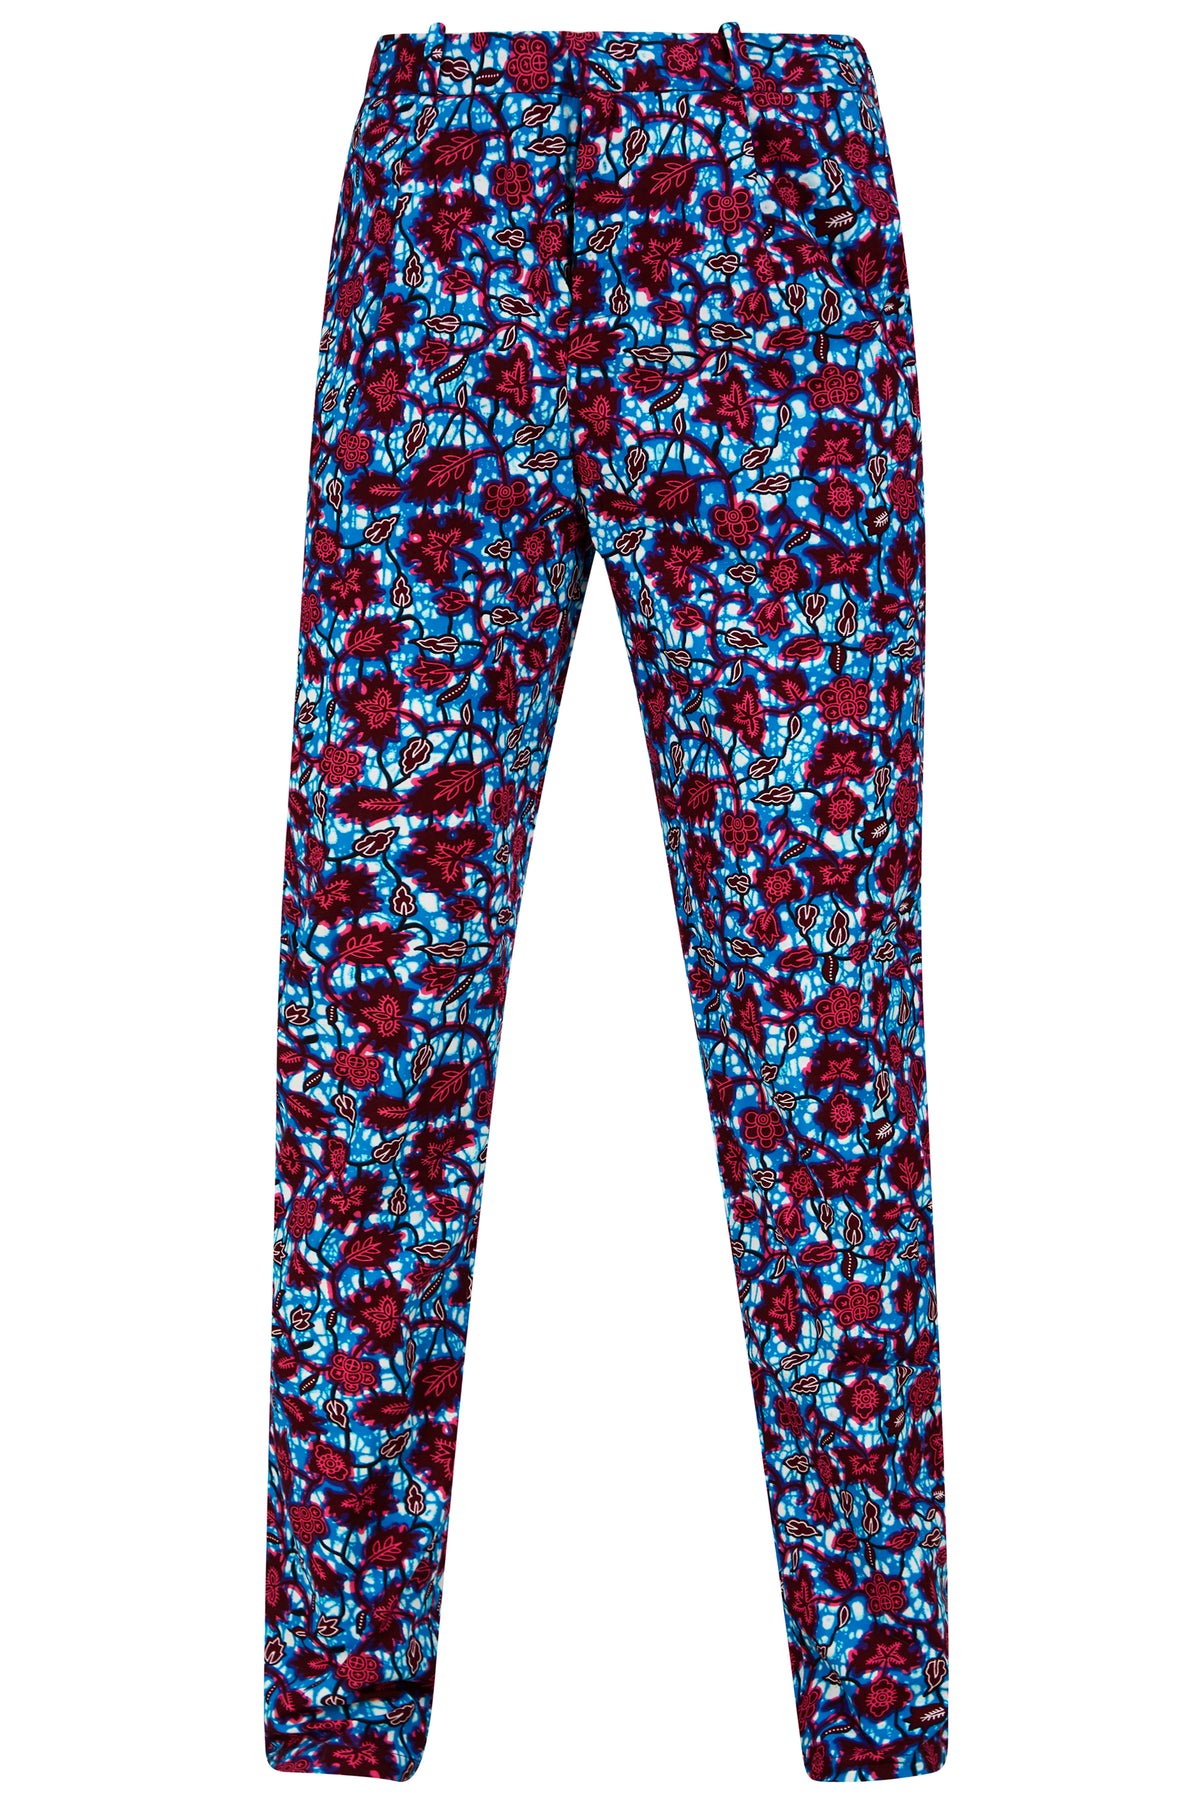 Osei straight leg trousers-Blue florals - OHEMA OHENE AFRICAN INSPIRED FASHION